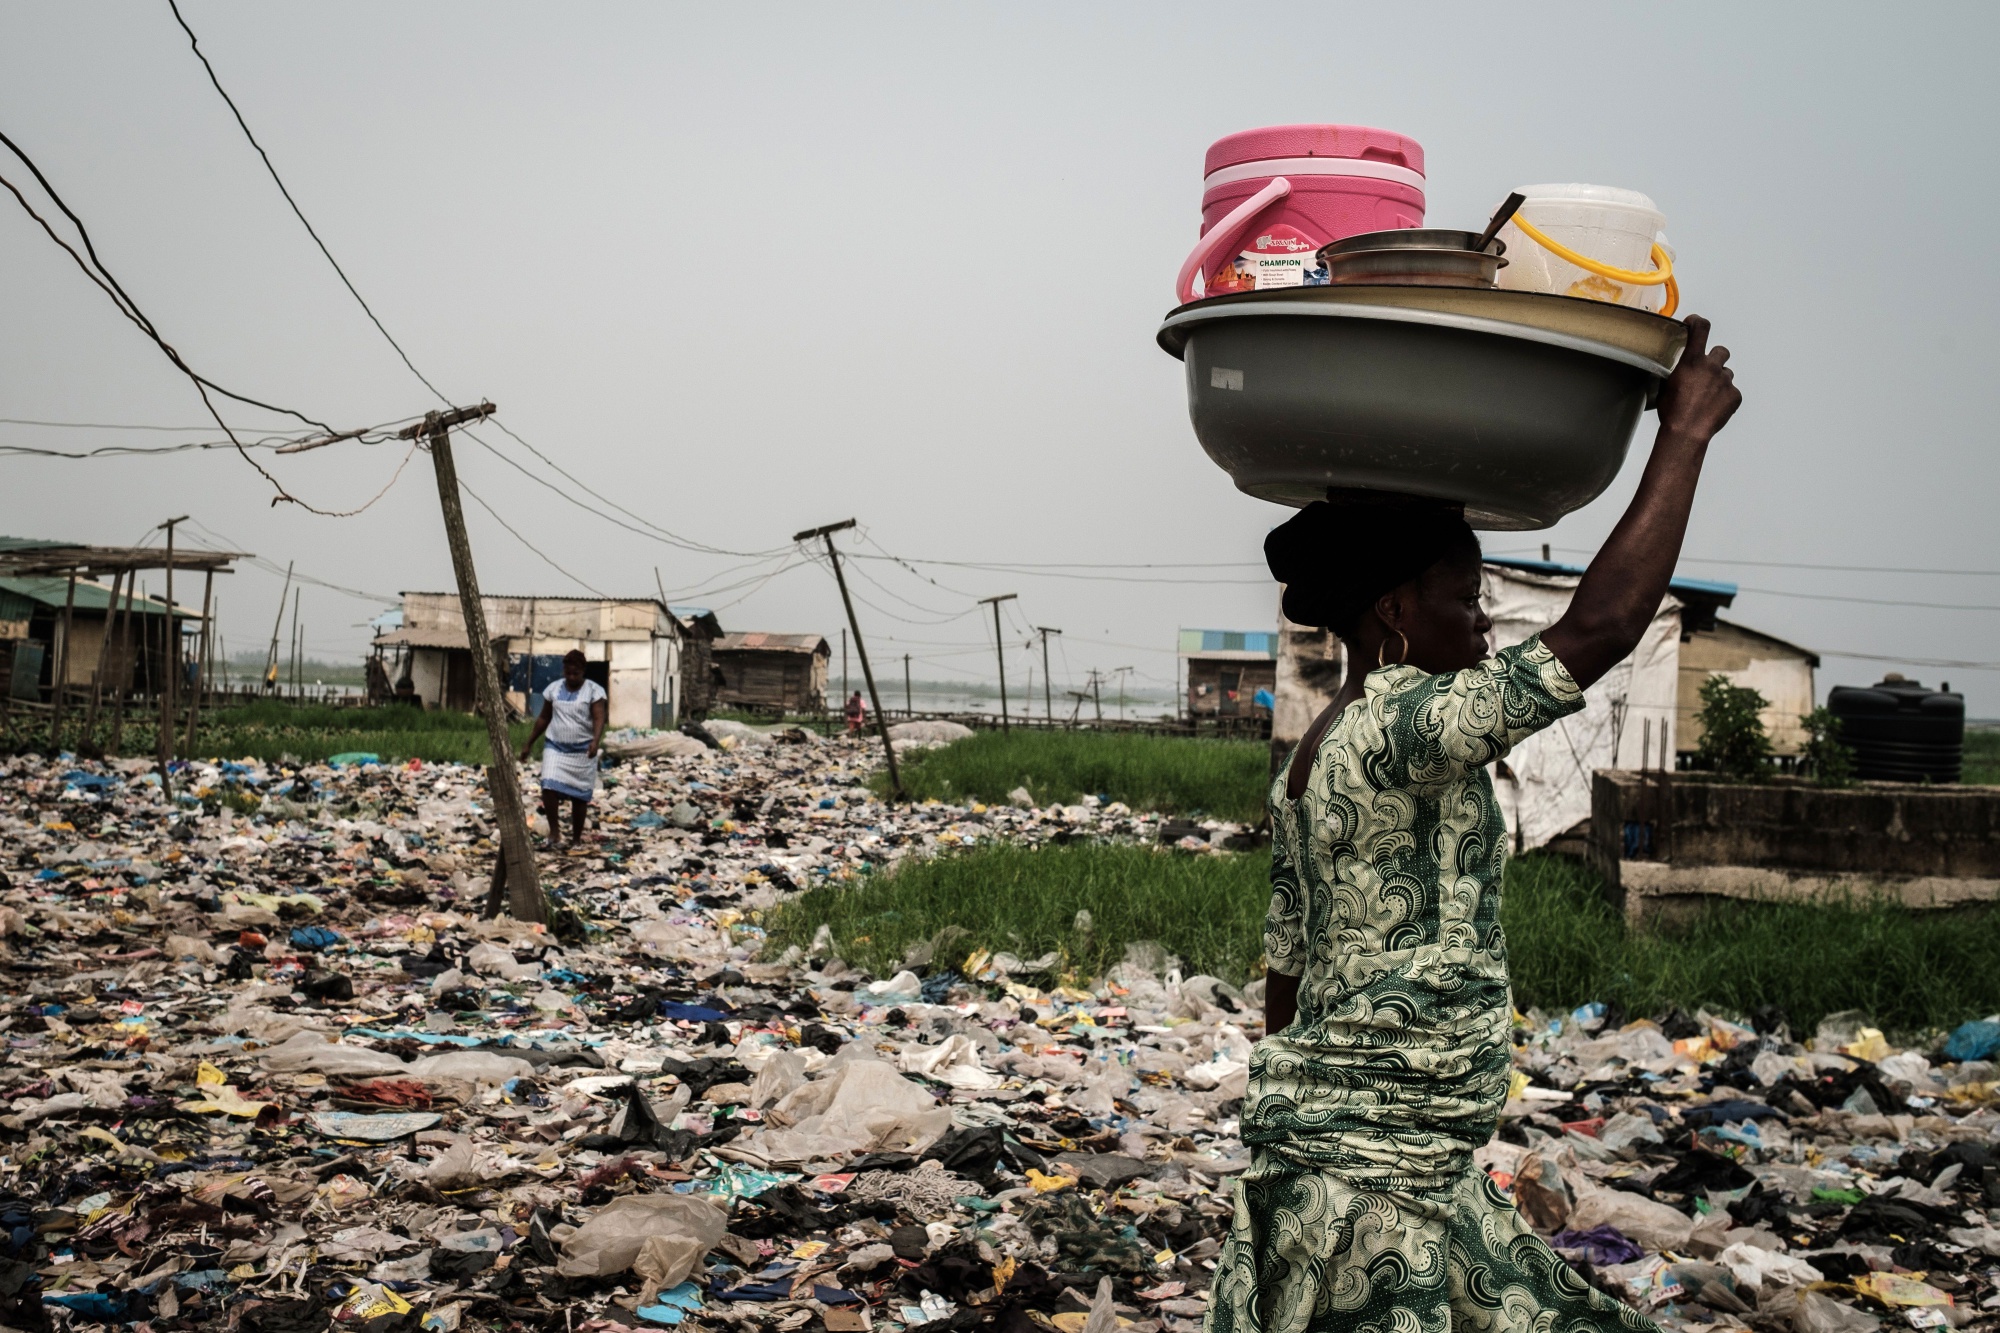 A woman walks on plastic waste in Lagos.